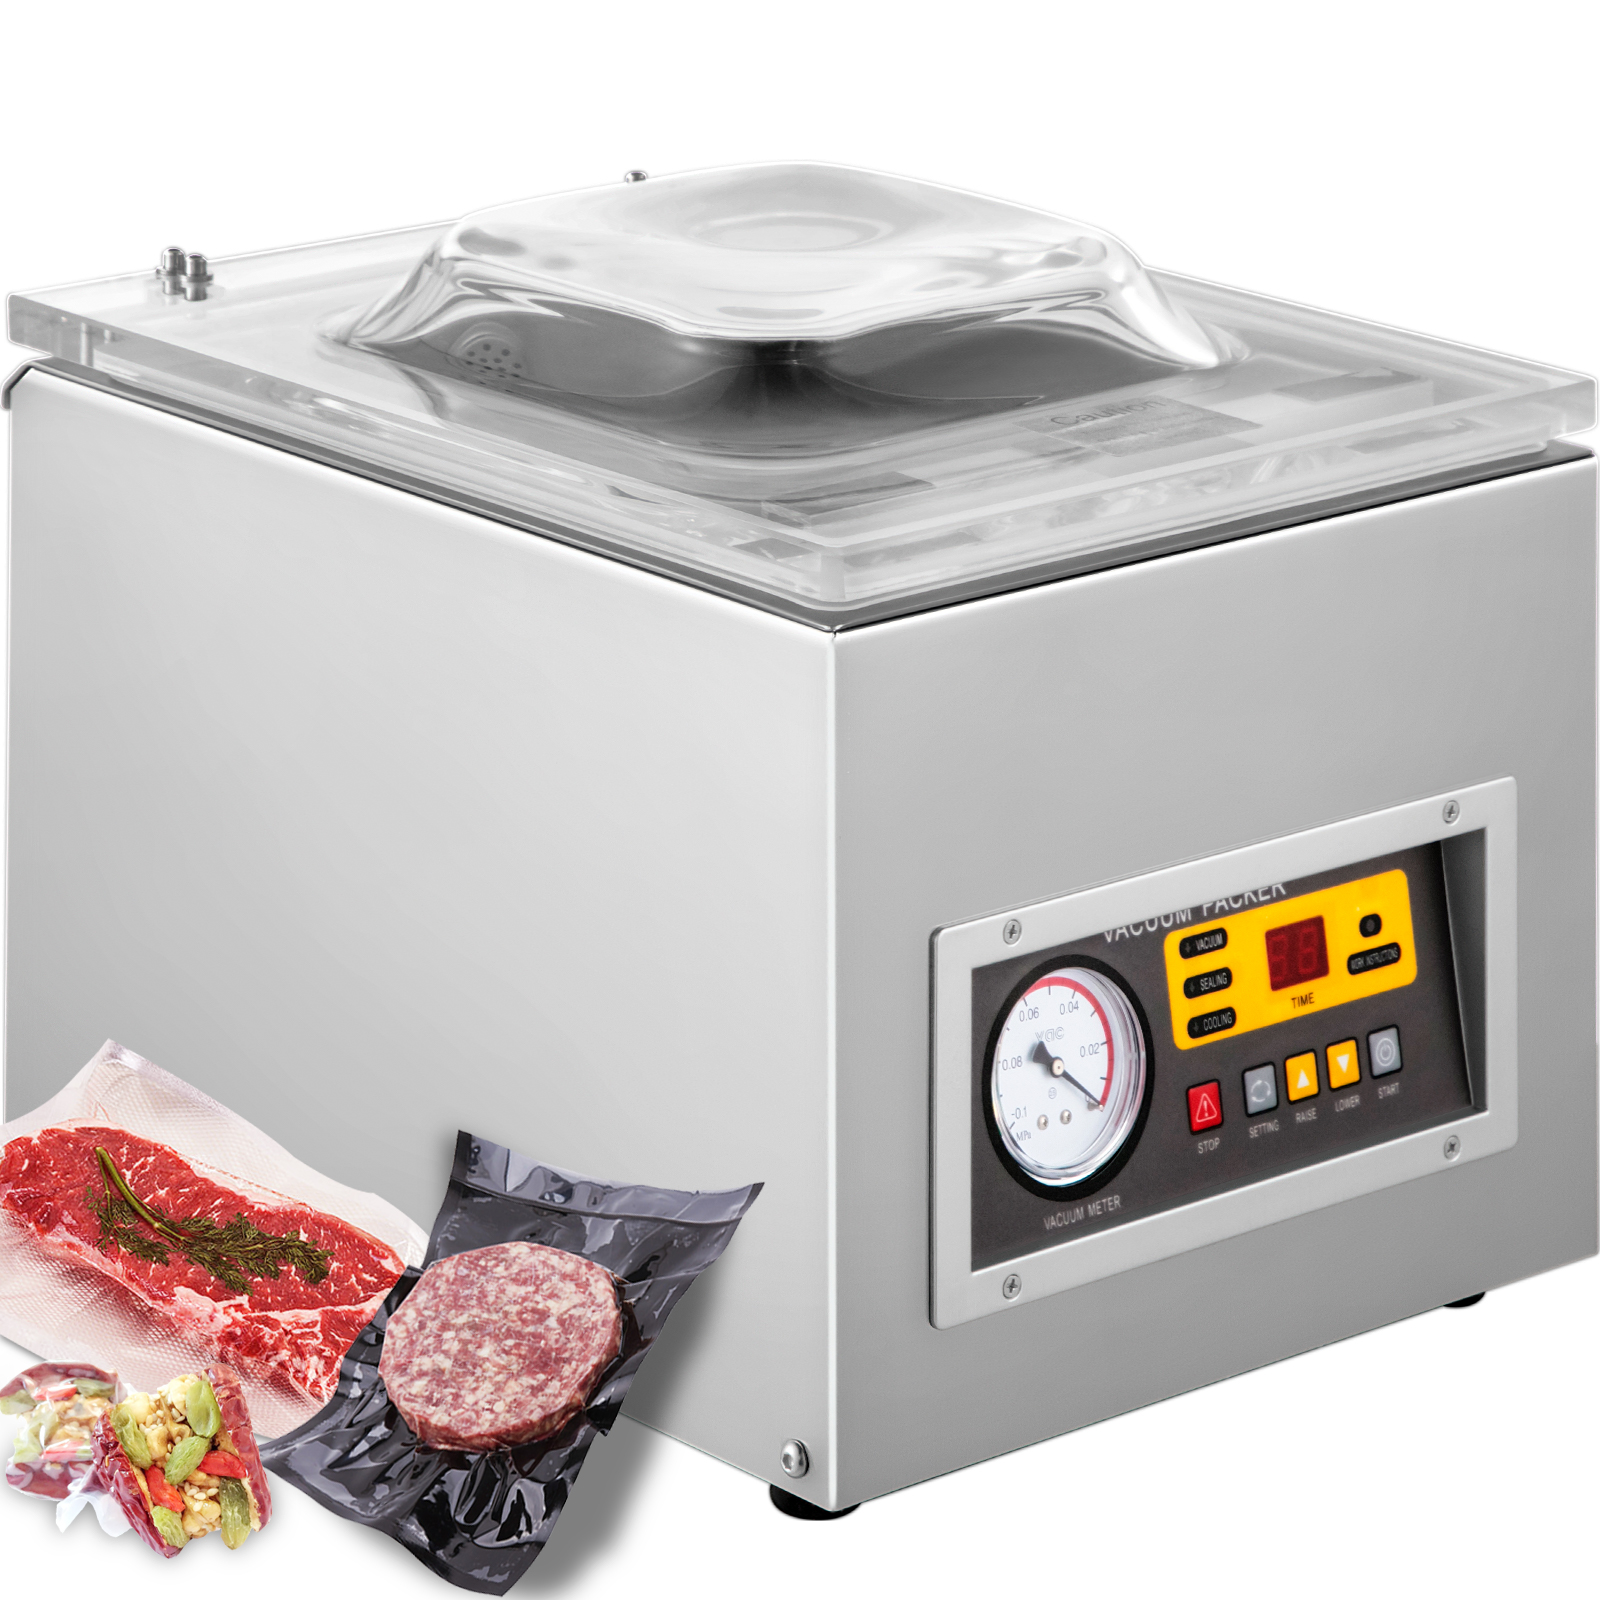 120w Vacuum Chamber Sealer Food Sealing Machine Commercial Packing Machine от Vevor Many GEOs